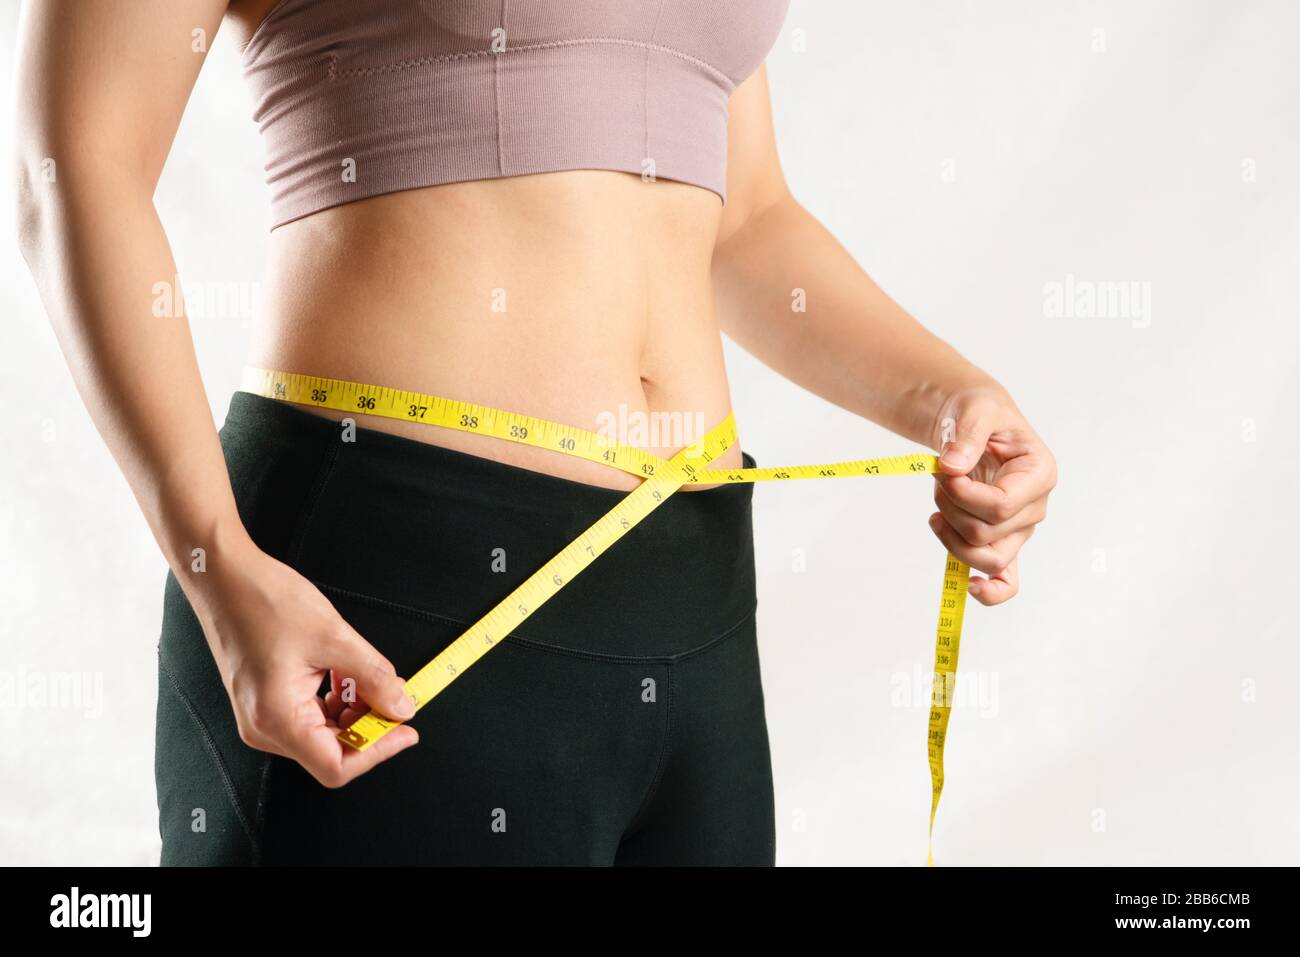 https://c8.alamy.com/comp/2BB6CMB/young-woman-measuring-her-belly-waist-with-measure-tape-woman-diet-lifestyle-concept-2BB6CMB.jpg